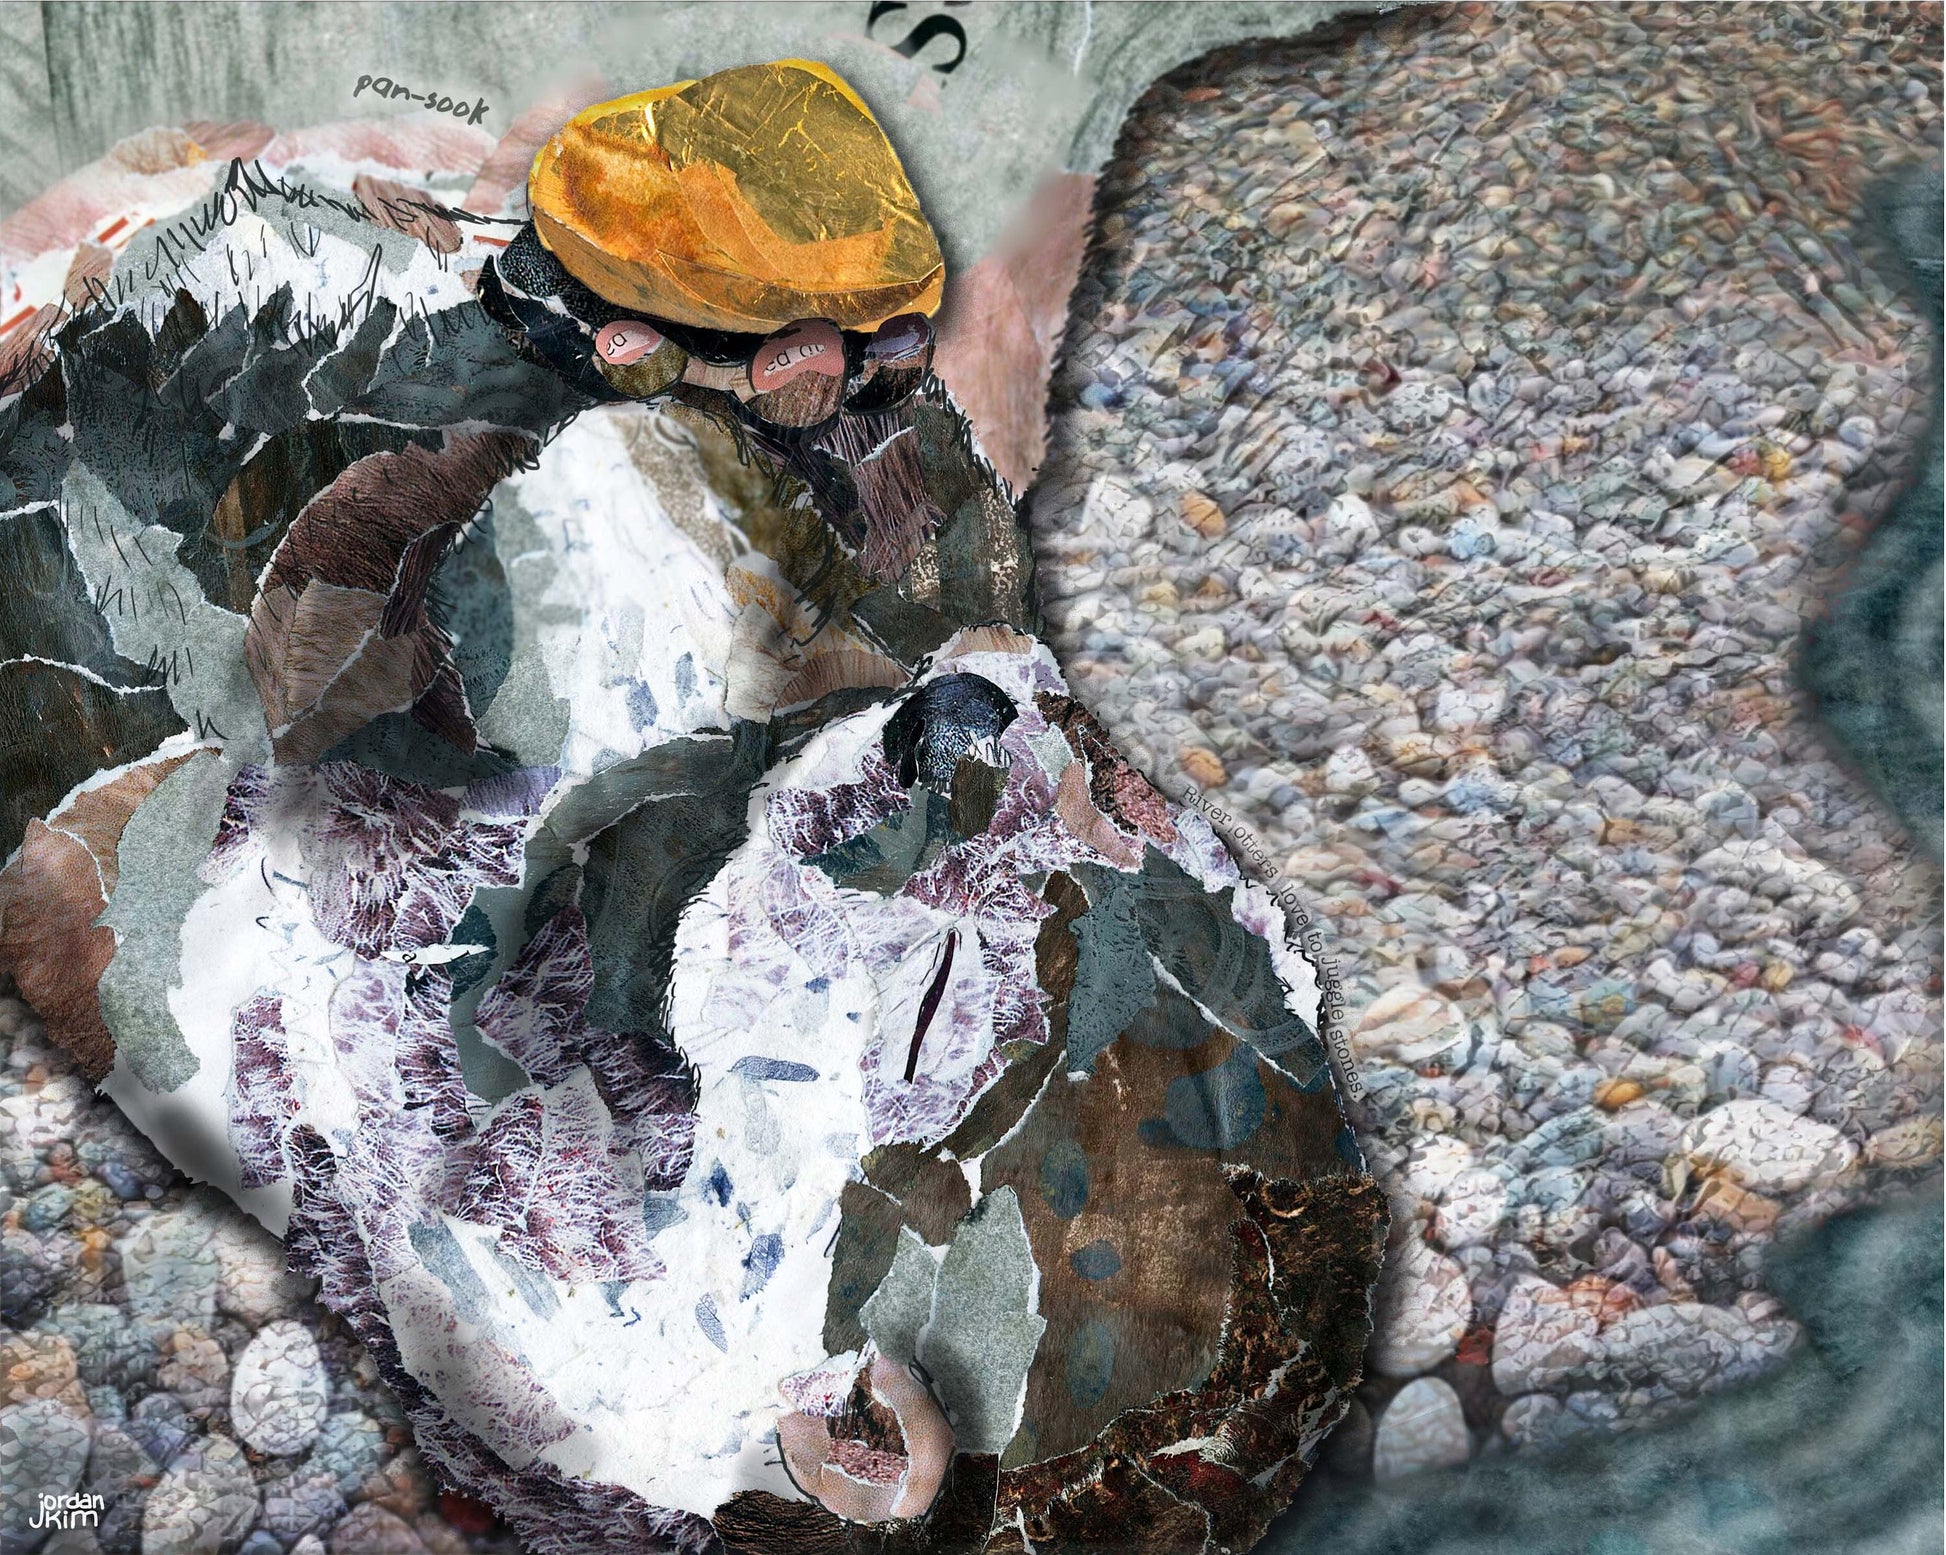 Greeting Card of mixed media collage of a river otter juggling a yellow stone, Yellowstone - Blank Inside